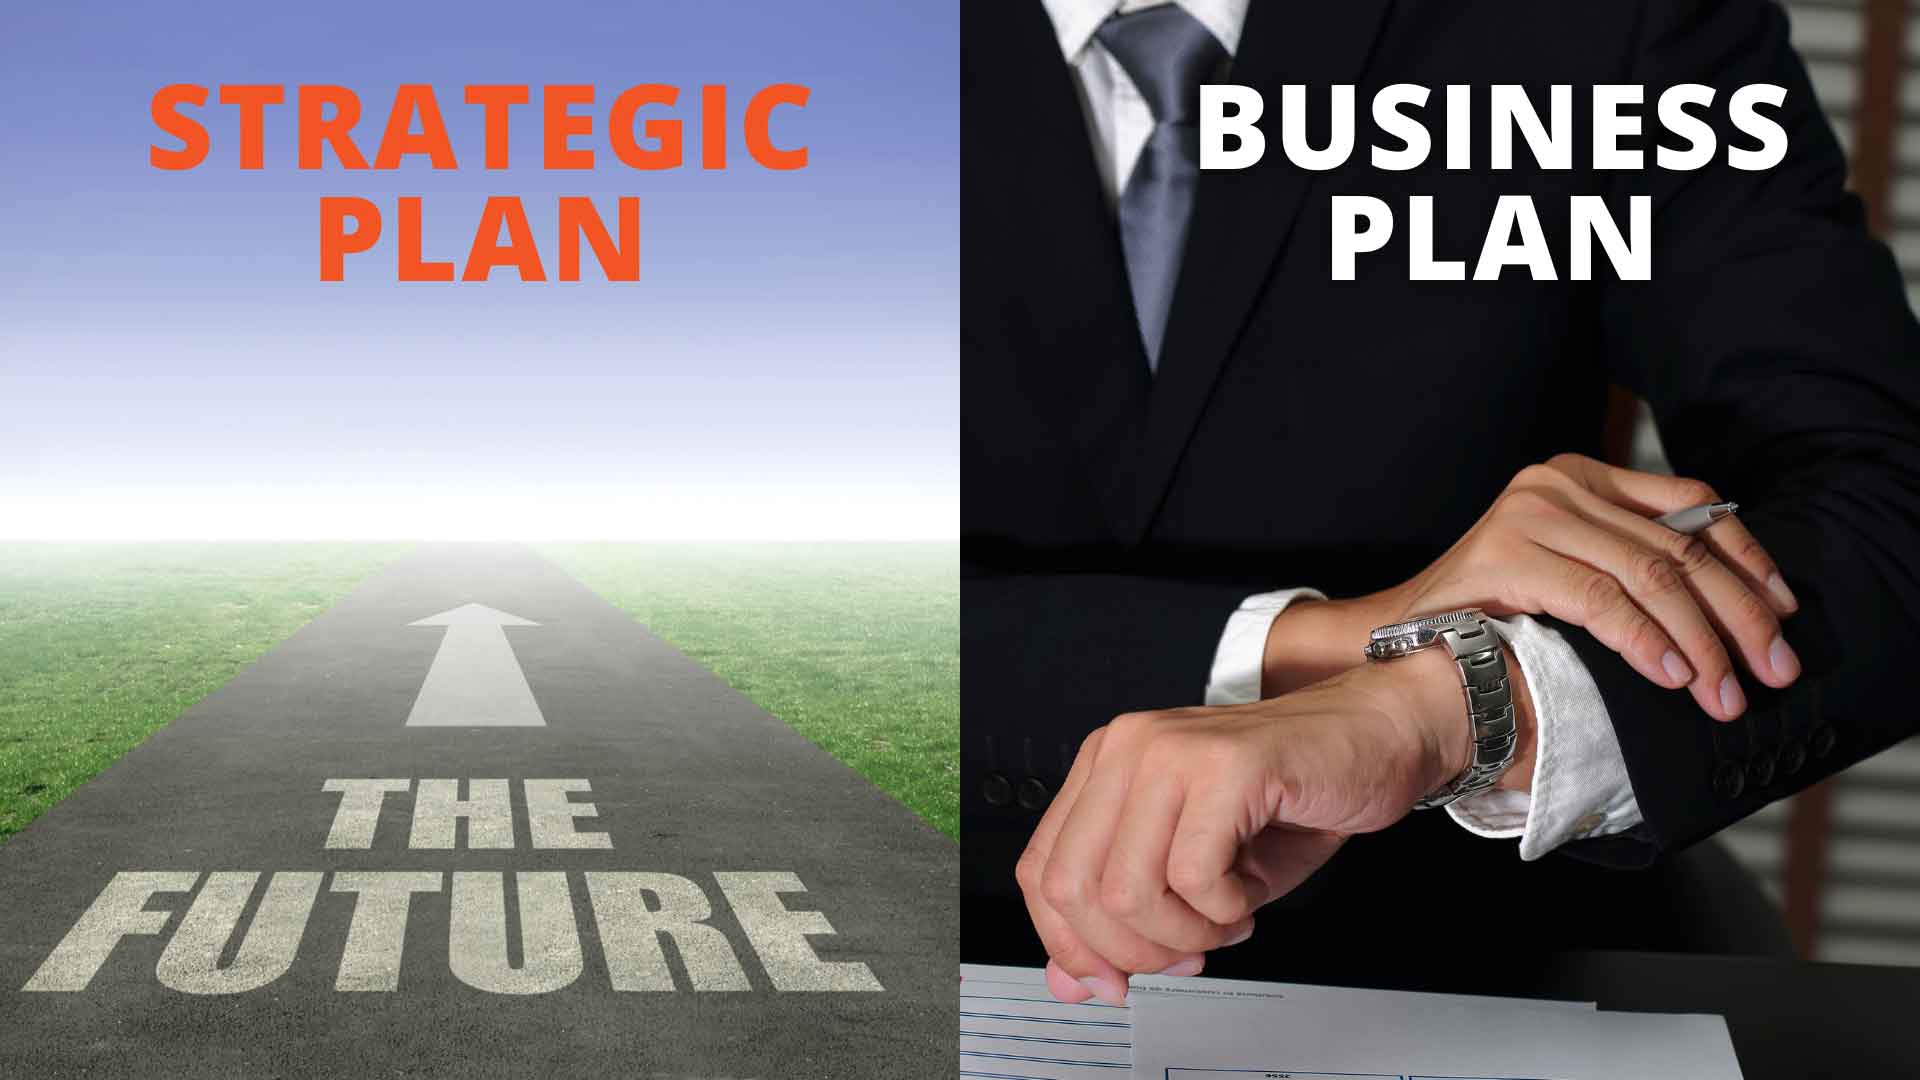 Image with strategic plan pointing to future on left and Business Plan with a man in a suit on the right